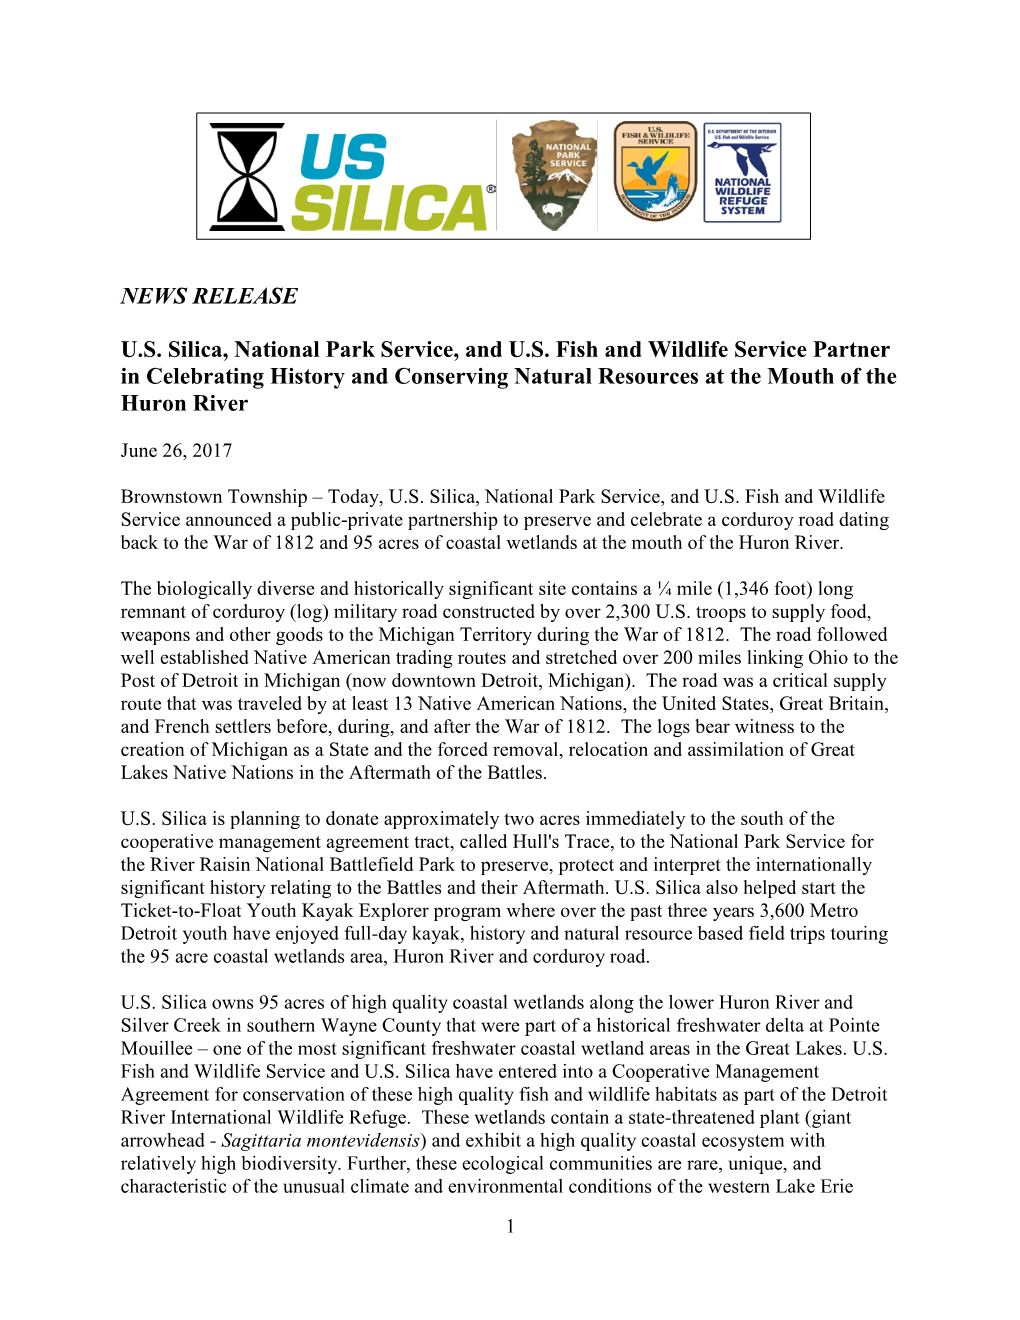 NEWS RELEASE U.S. Silica, National Park Service, and U.S. Fish And